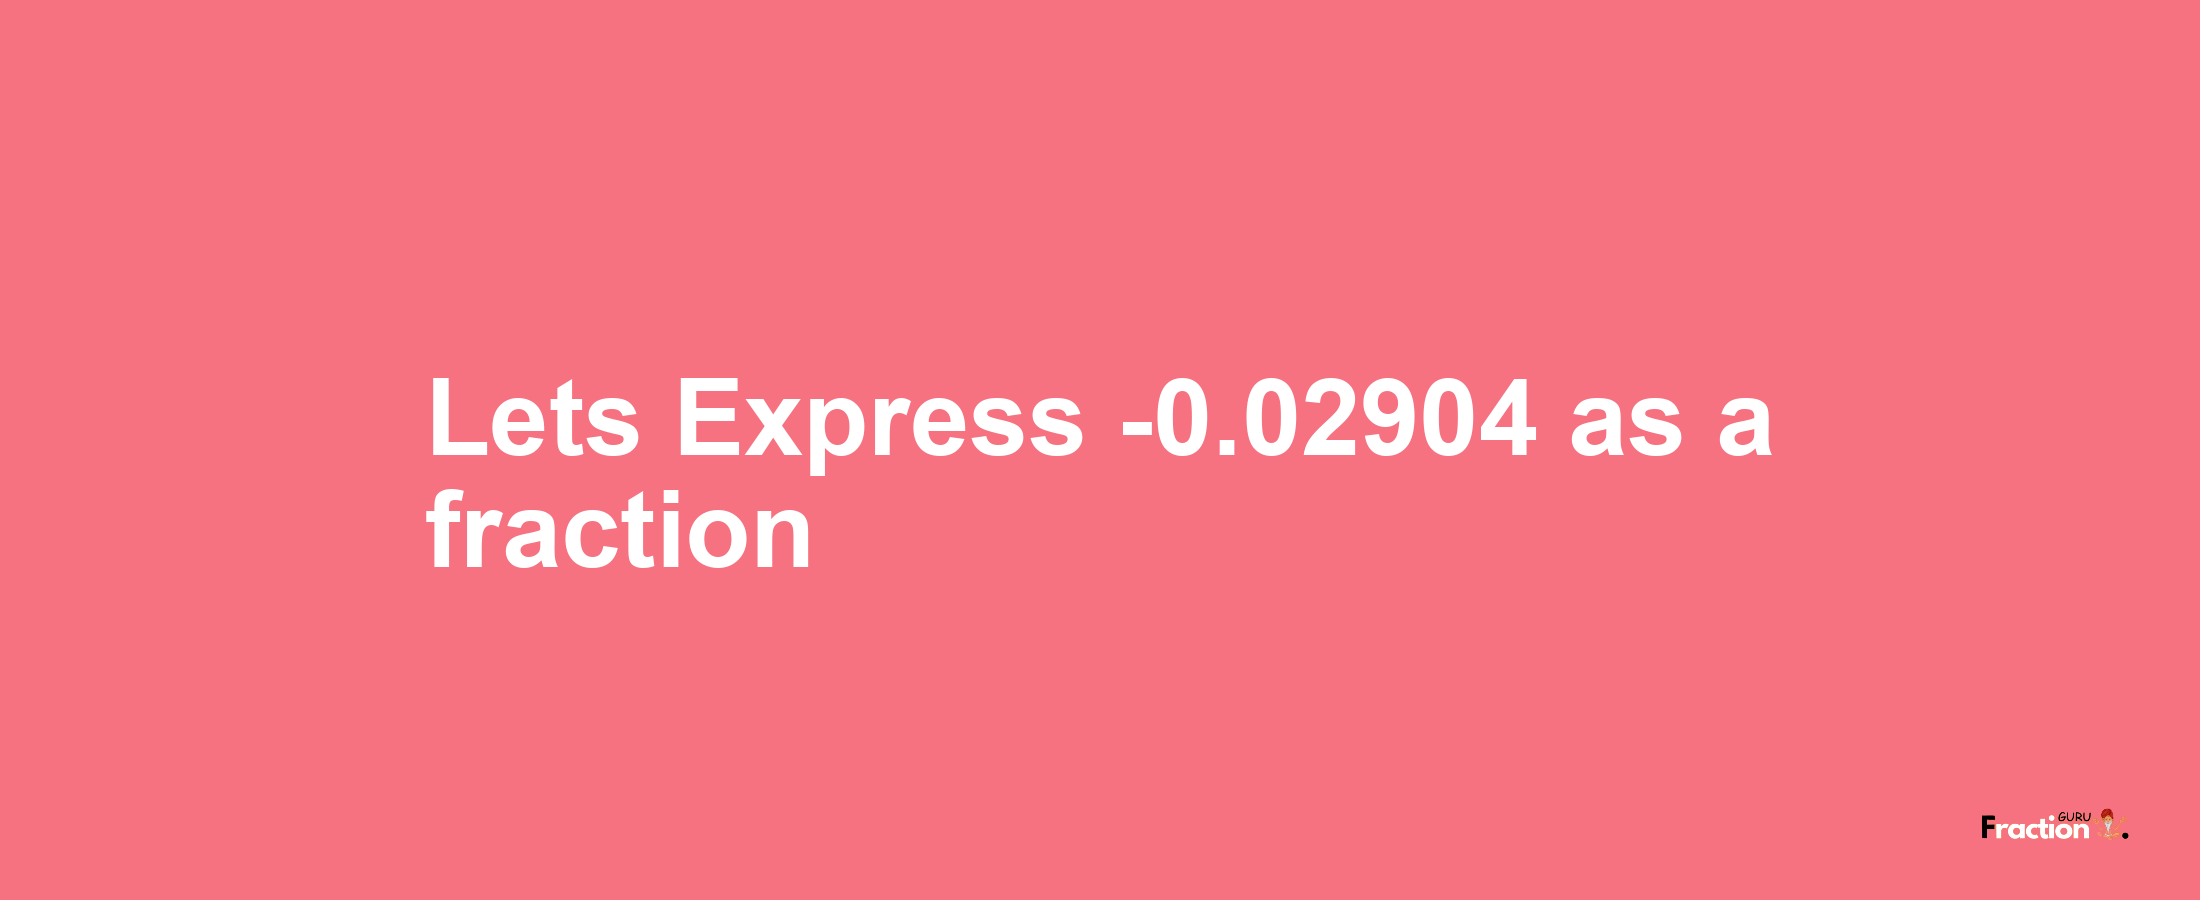 Lets Express -0.02904 as afraction